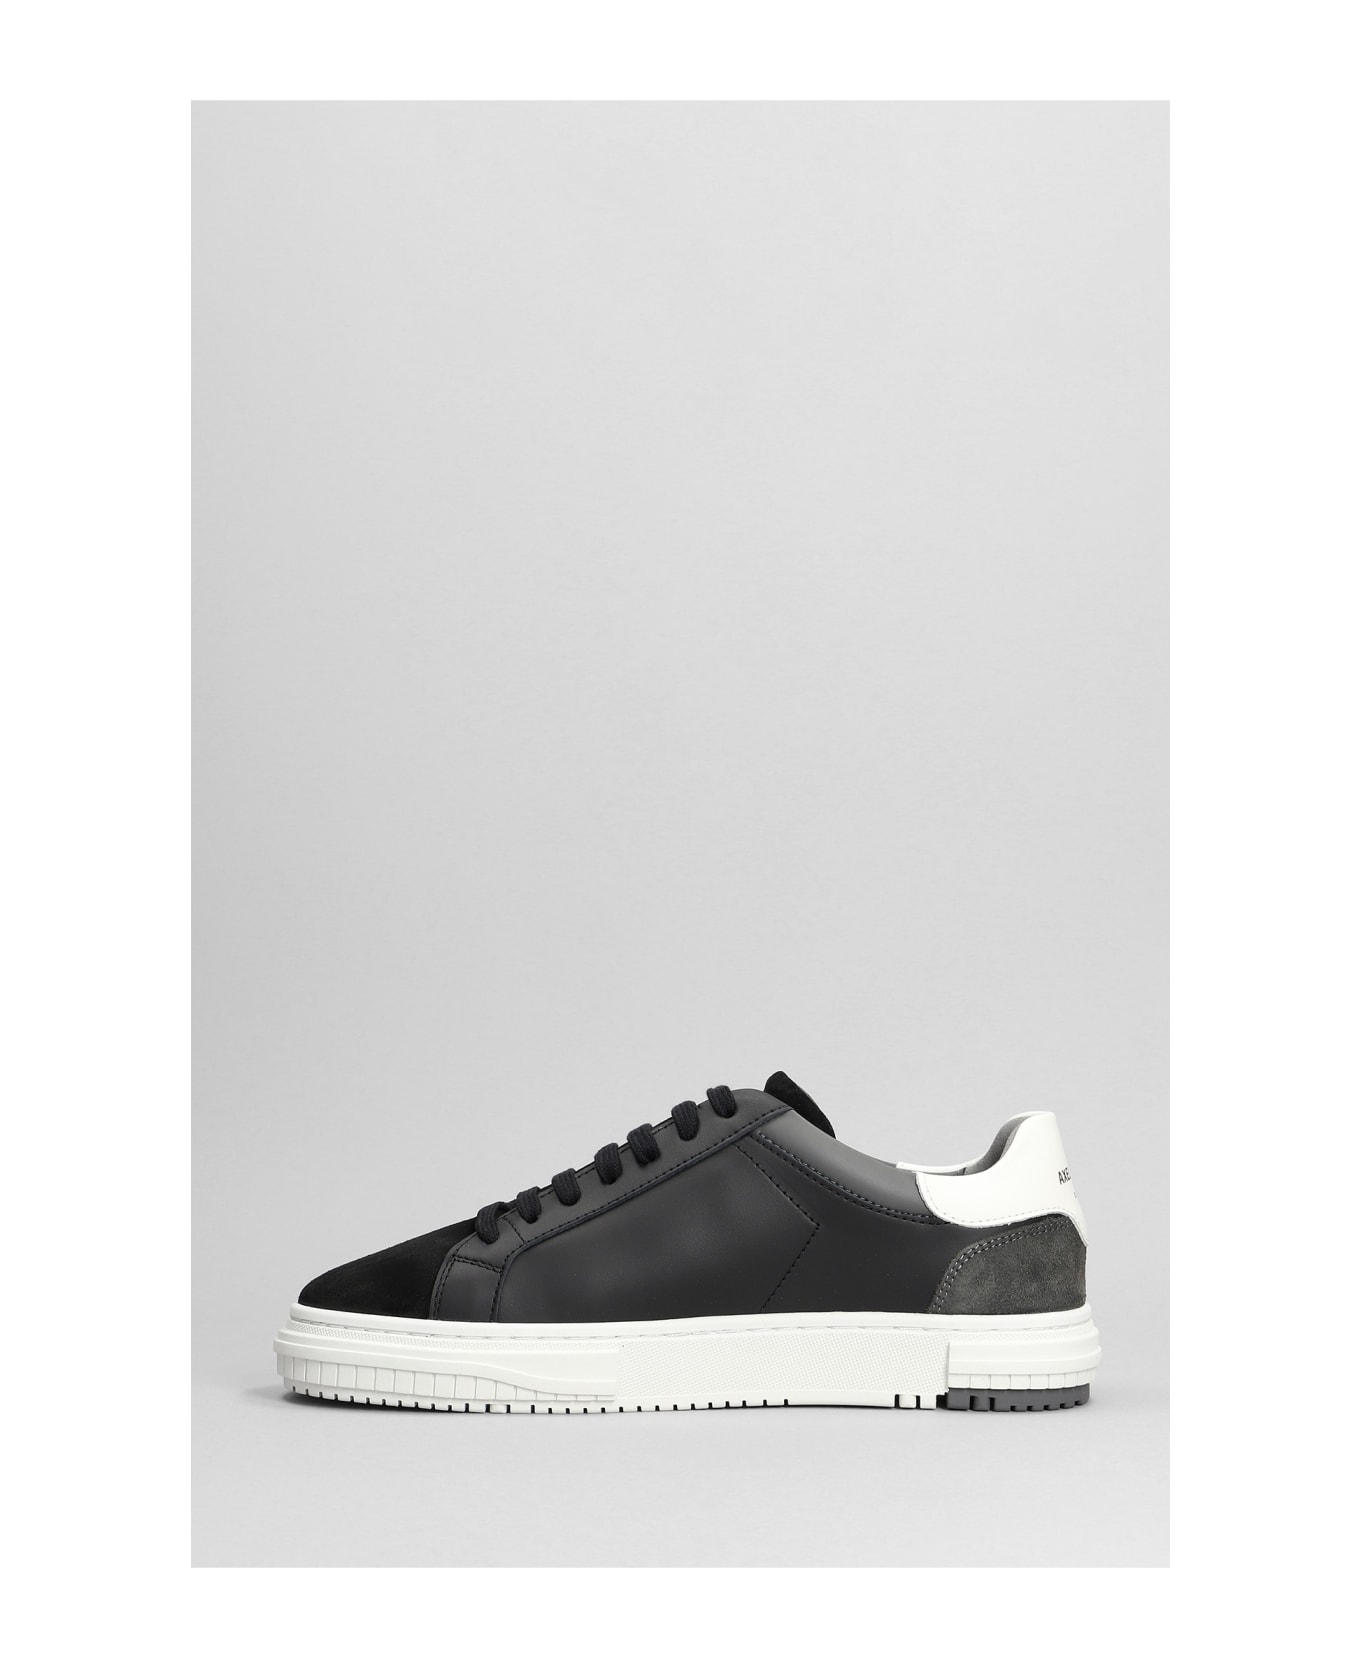 Axel Arigato Atlas Sneakers In Black Suede And Leather - black